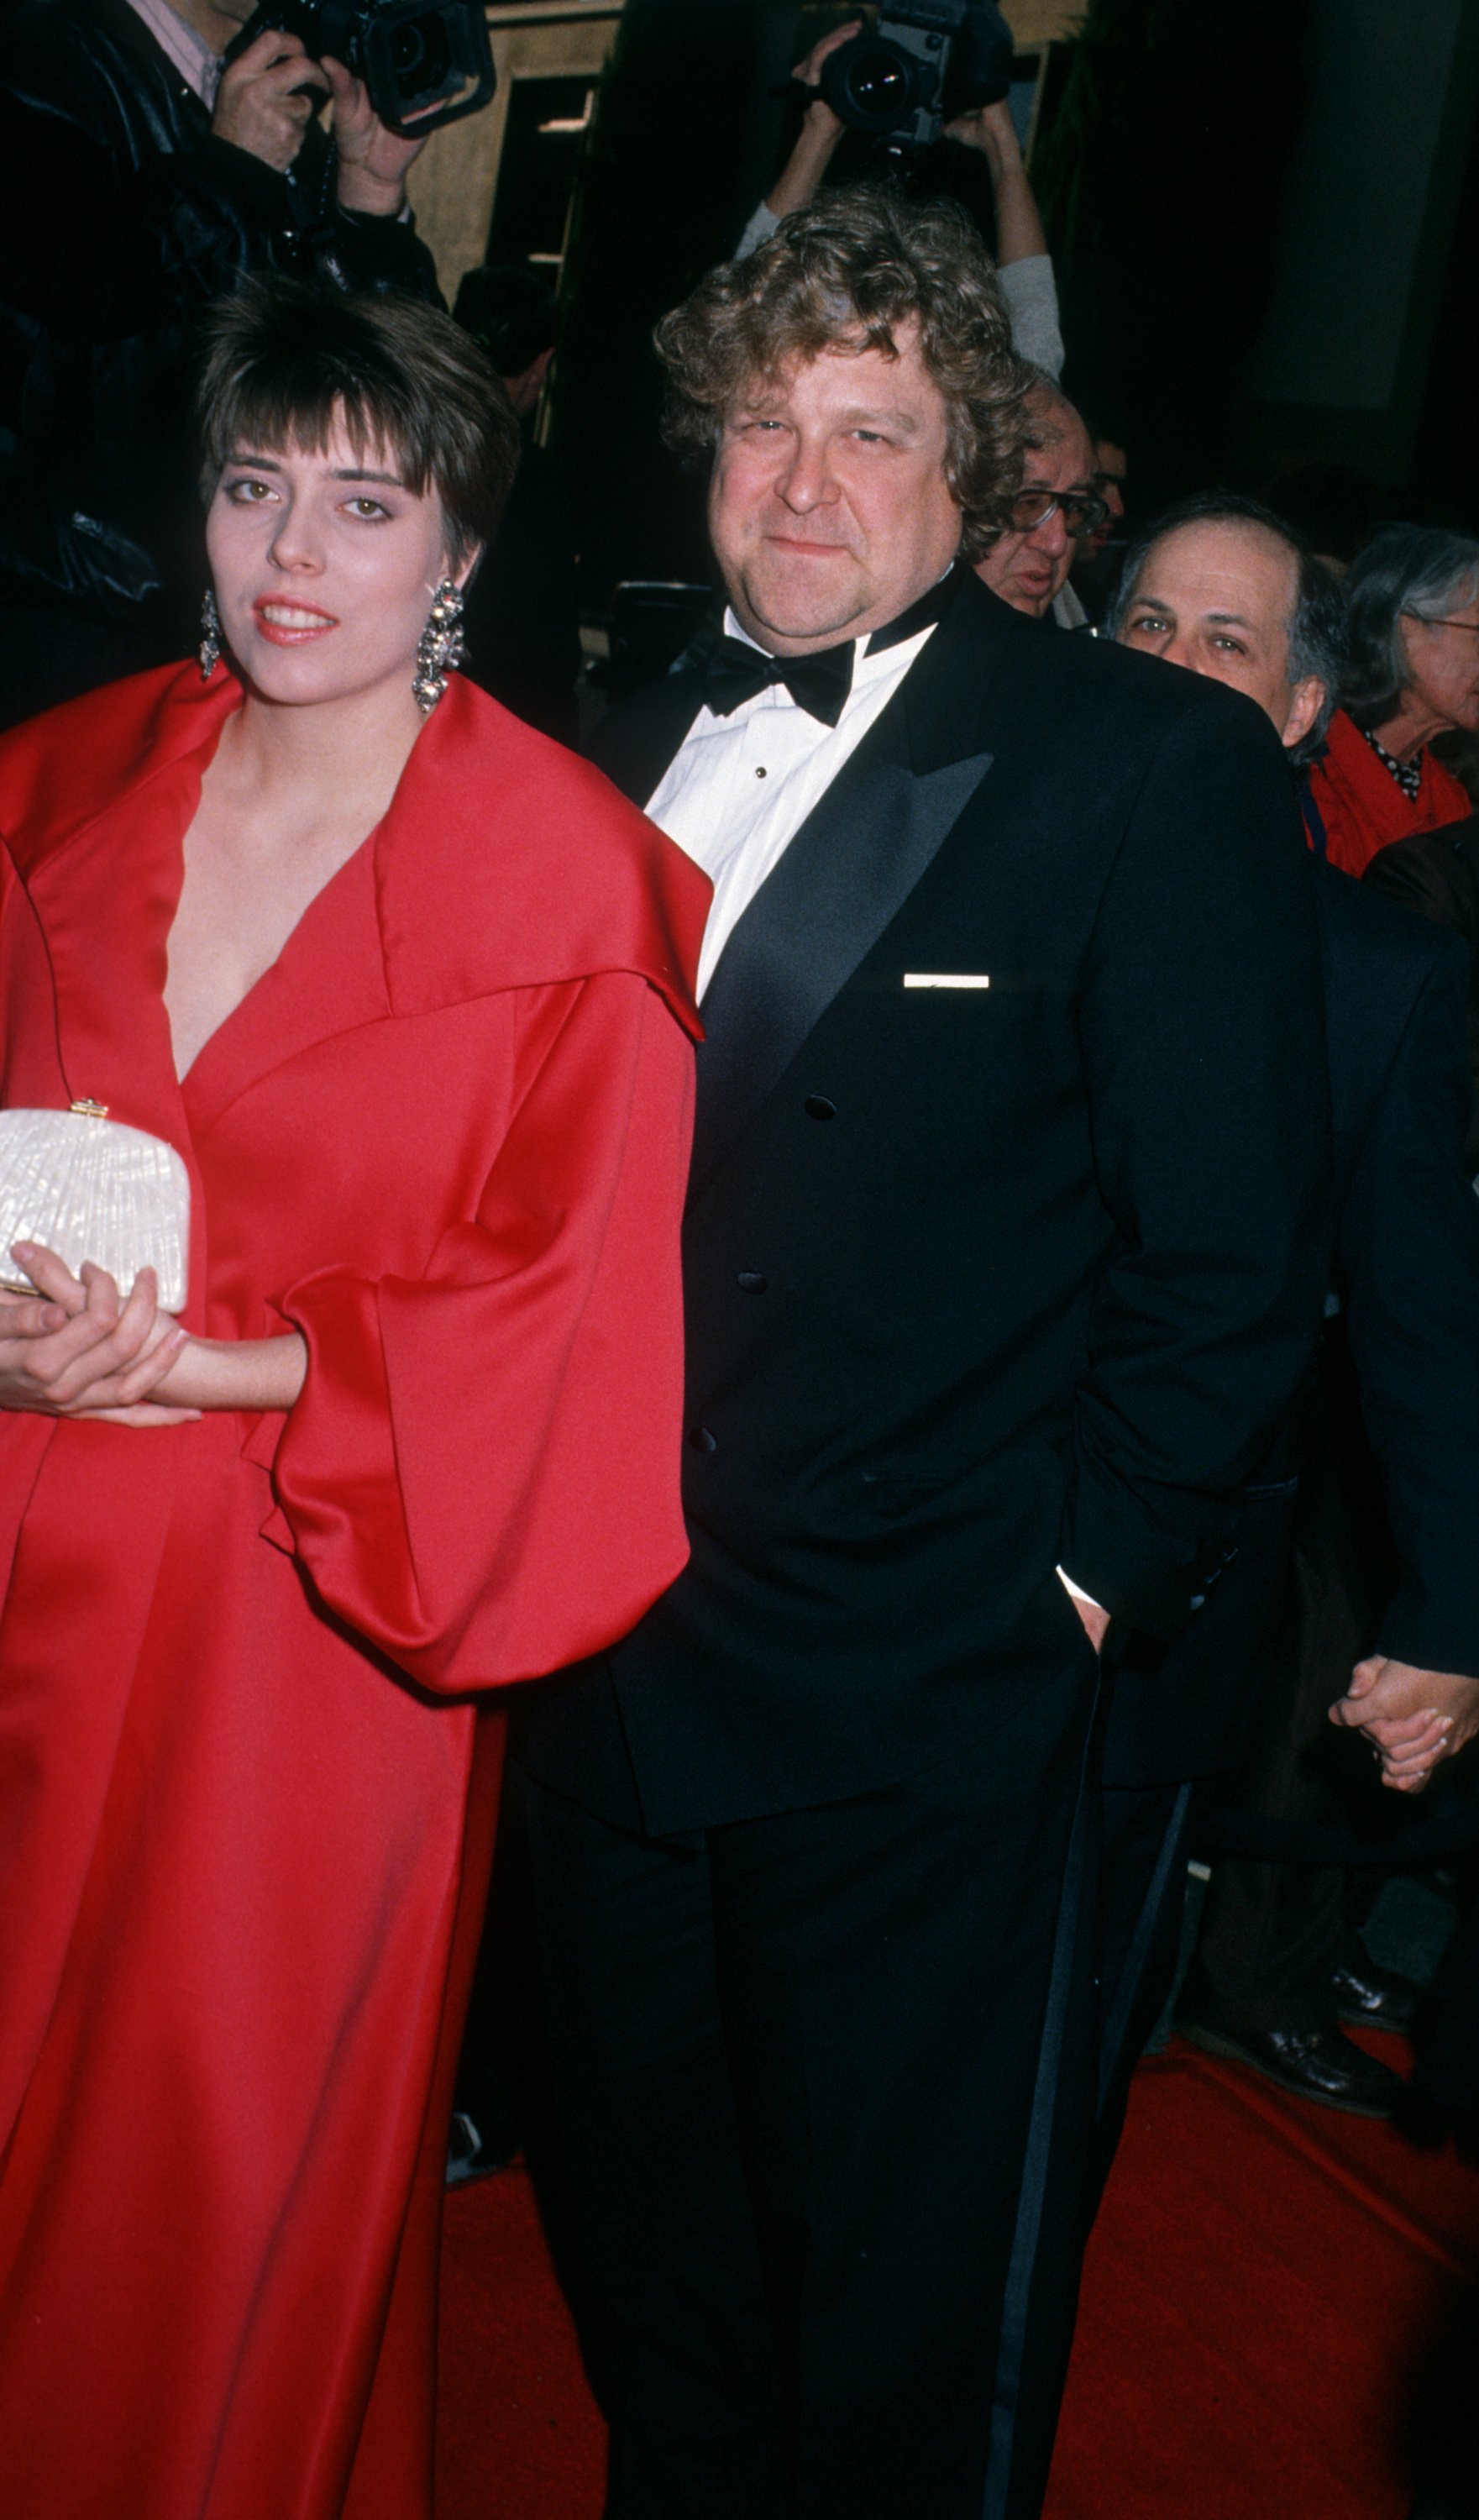 John Goodman and wife Annabeth Hartzog attending 16th Annual People's Choice Awards on March 11, 1990 at the Universal Ampitheater in Universal City, California | Source: Getty Images 